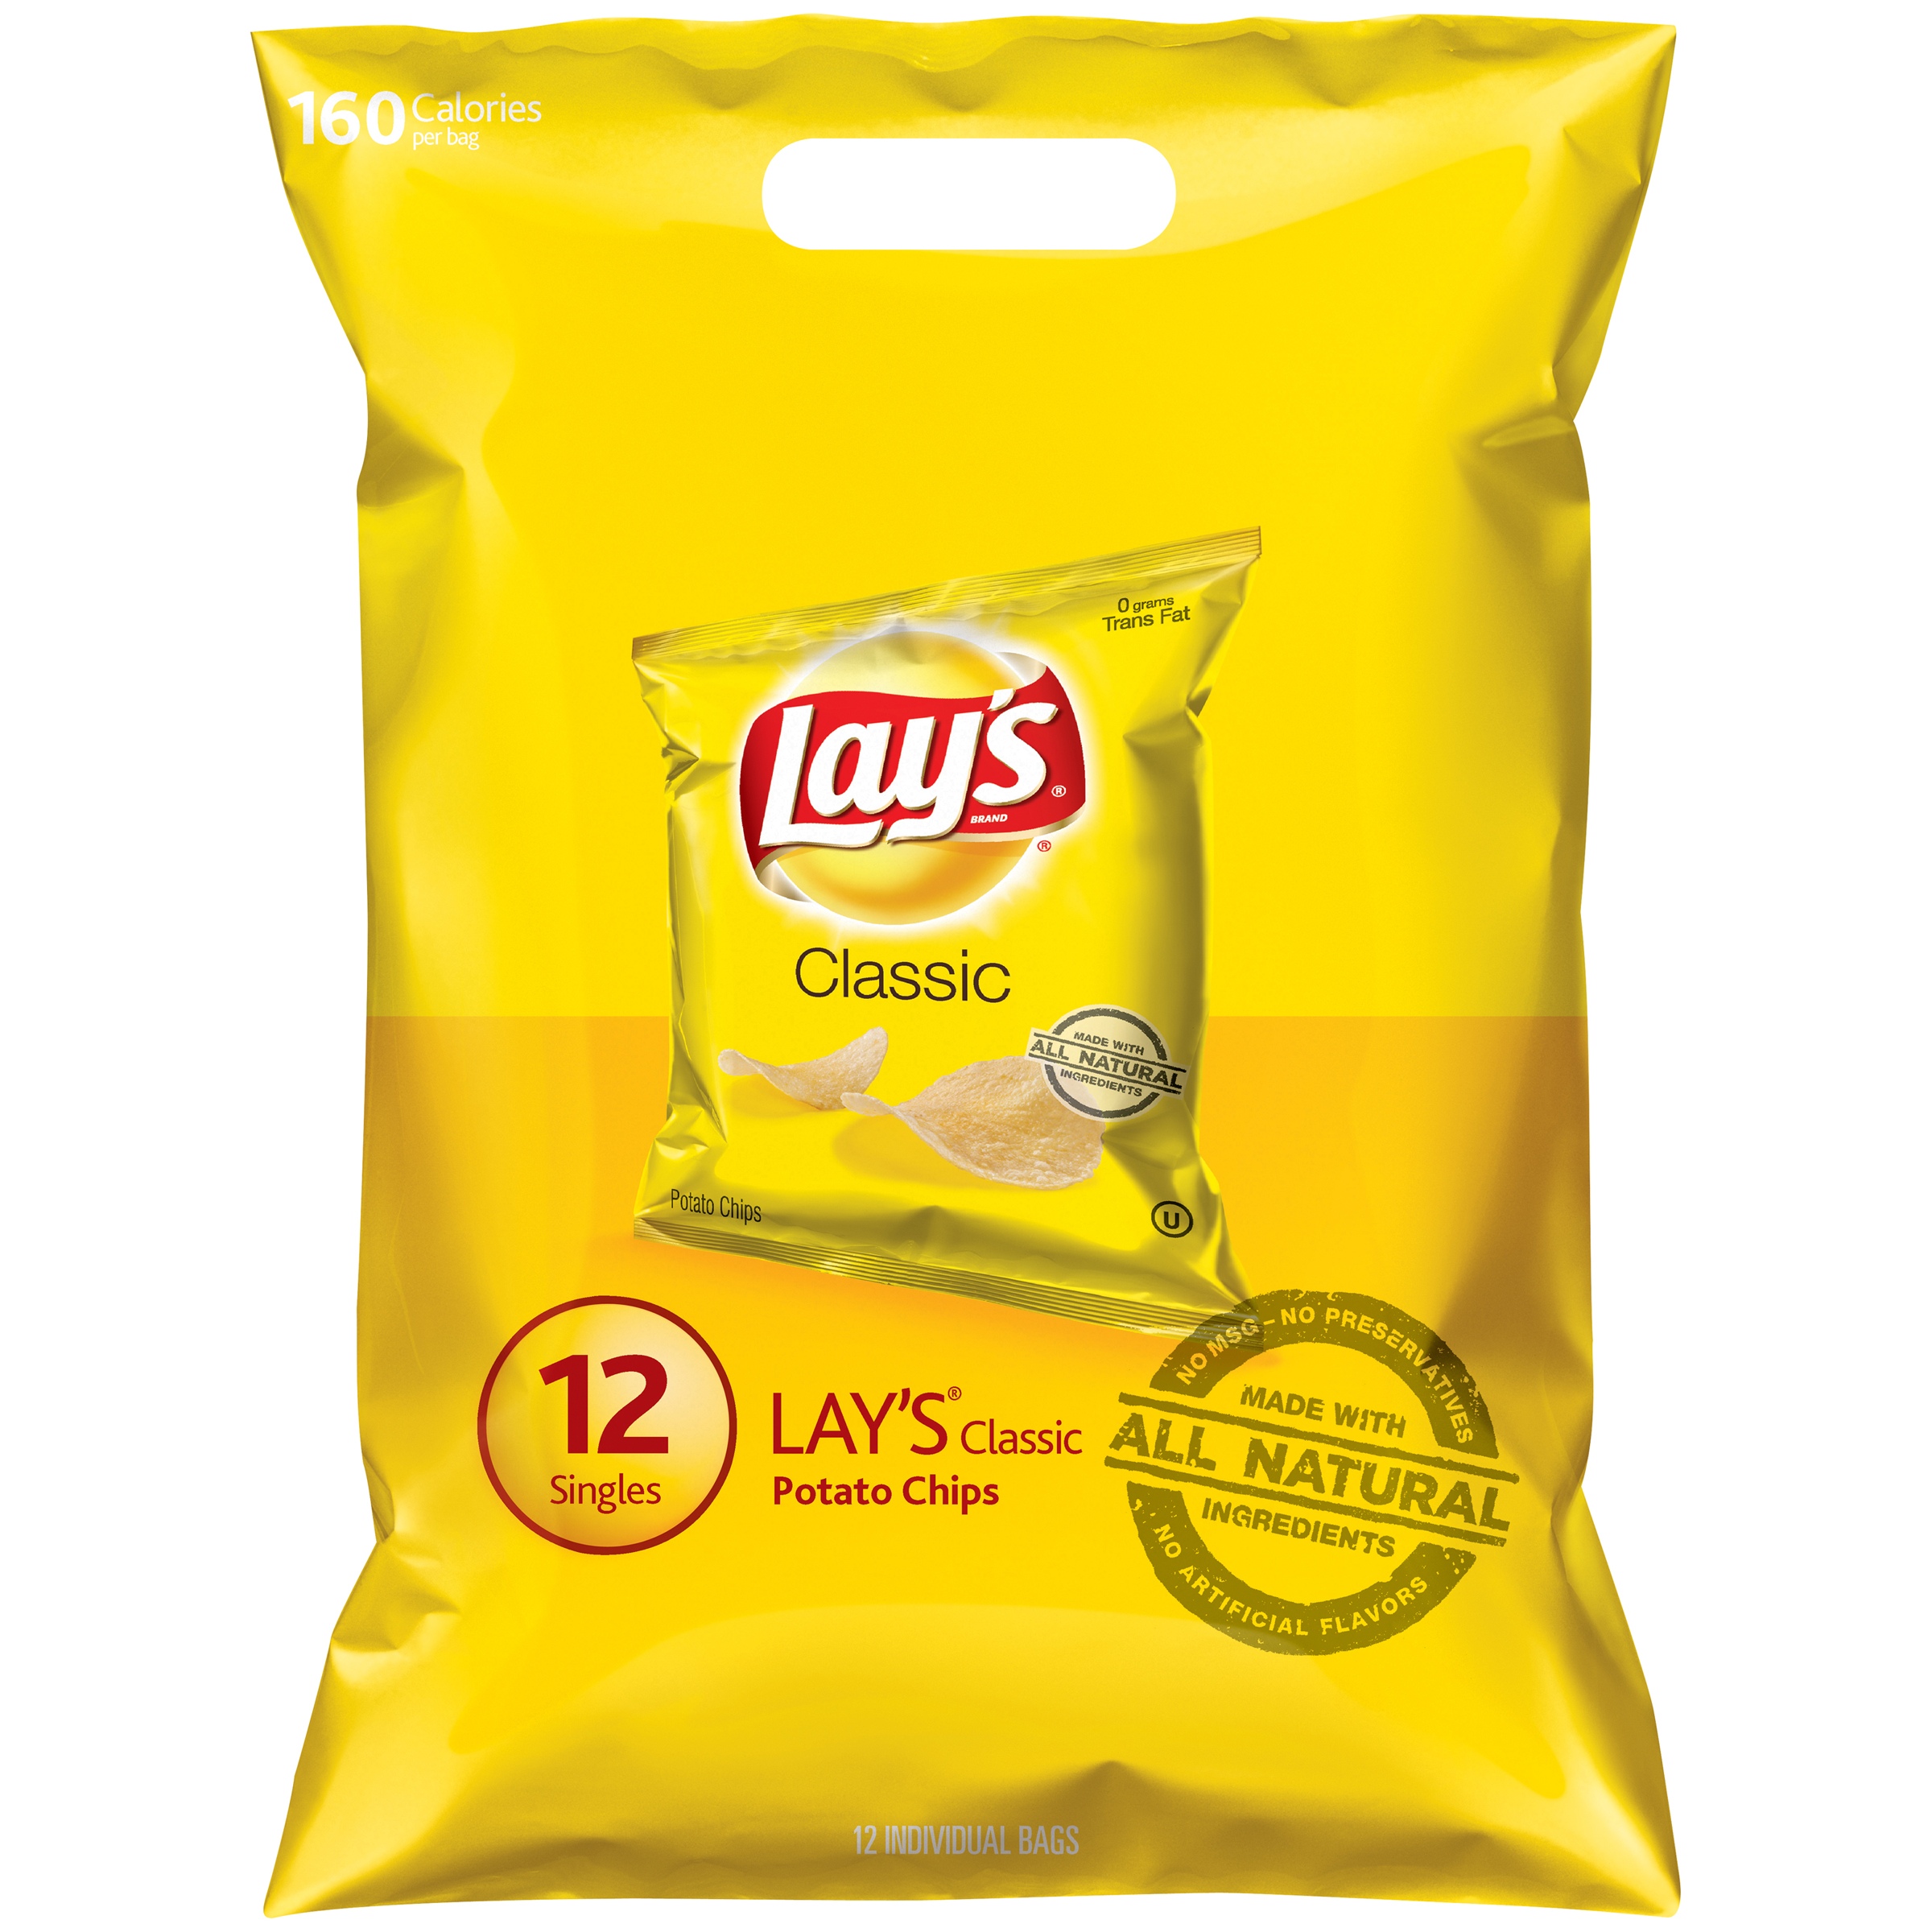 Lay's Classic Potato Chips, 12 count, 1 oz Bags - image 3 of 5